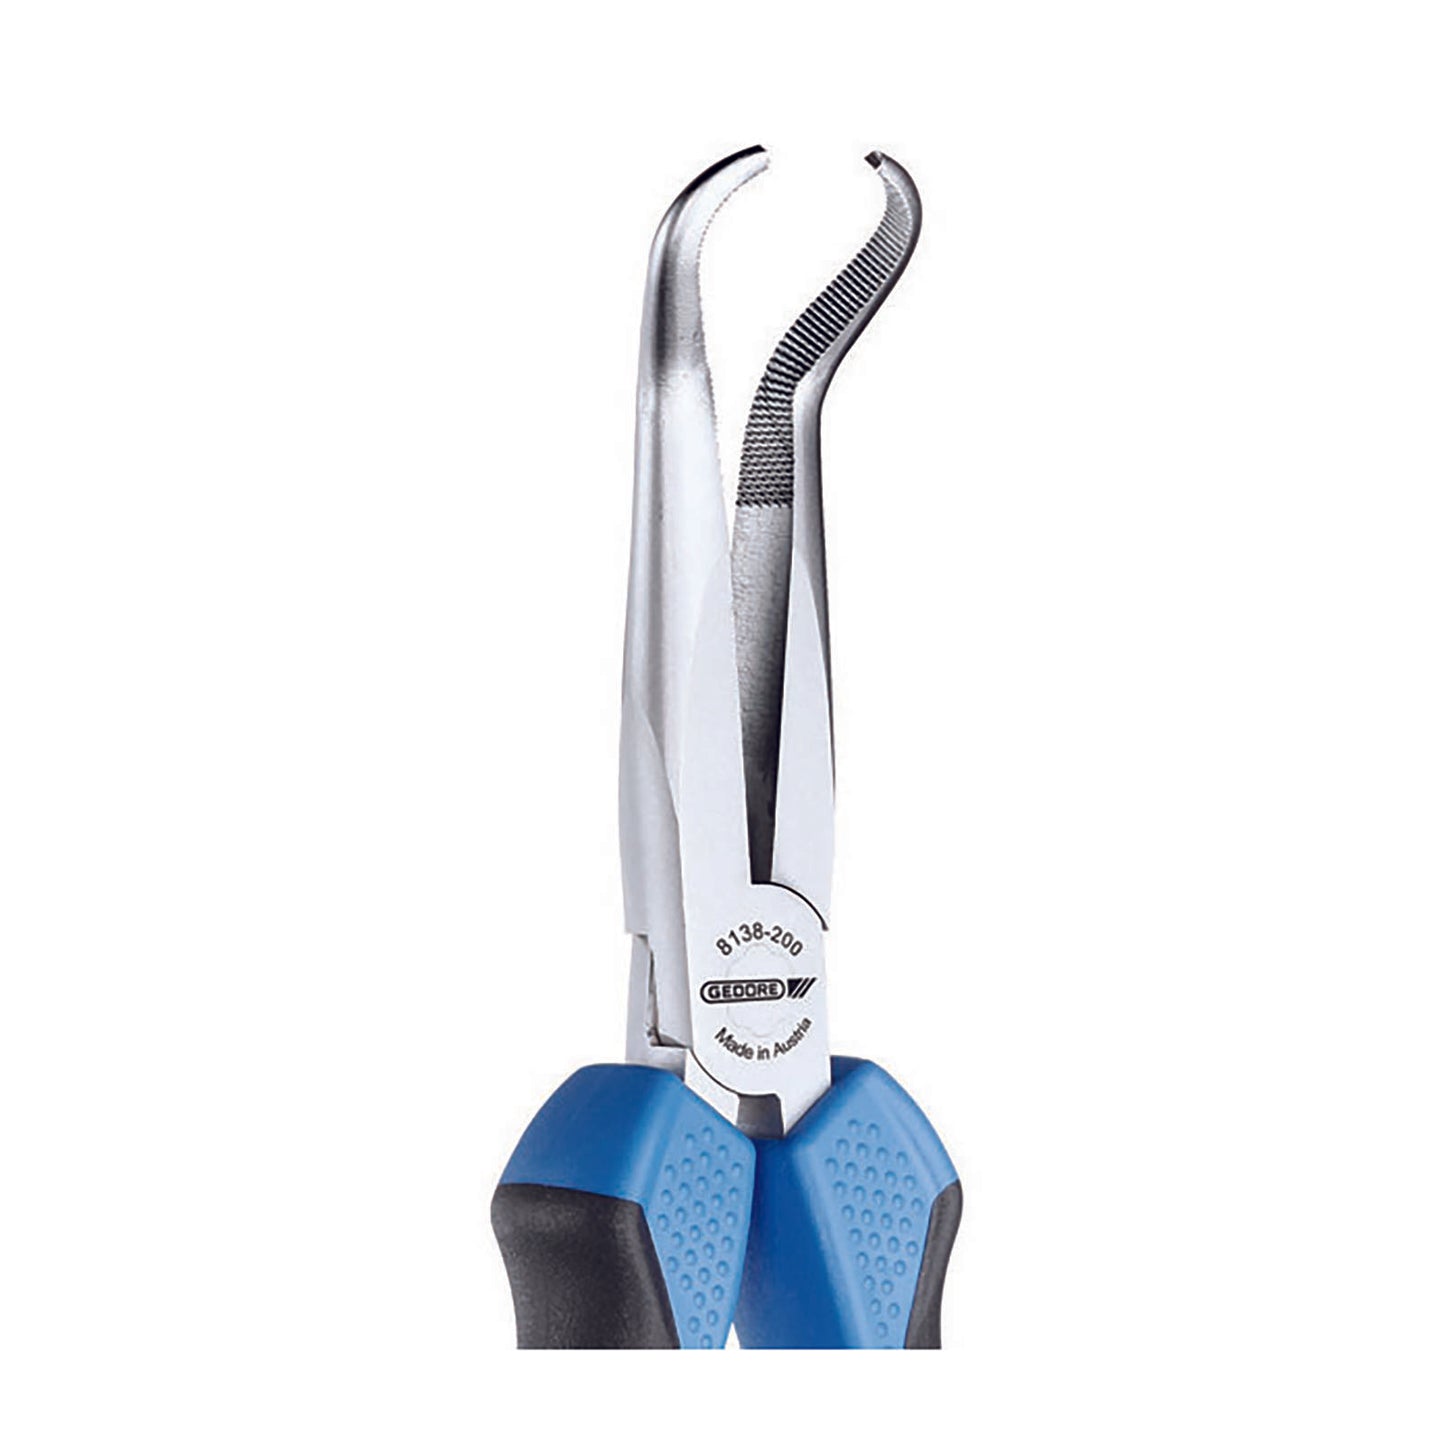 GEDORE 8138-200 JC - Angled non-cutting pliers 200mm (6723350)